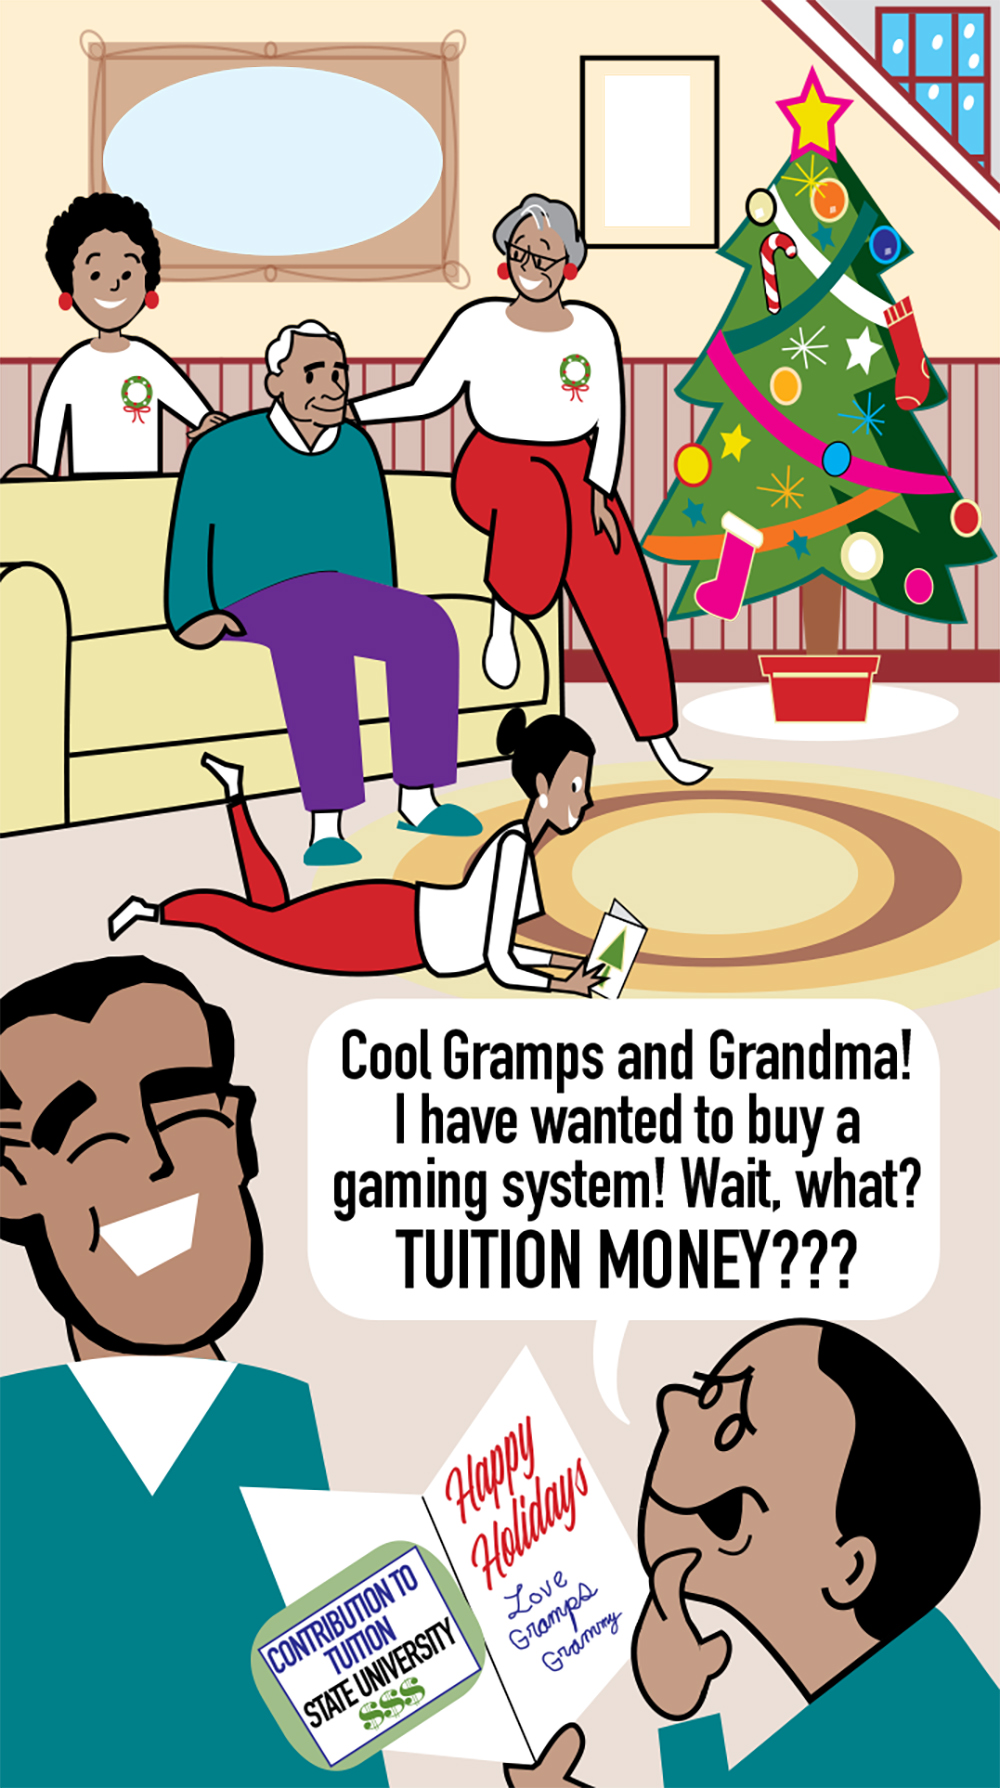 Want to Share Your Wealth with Grandkids